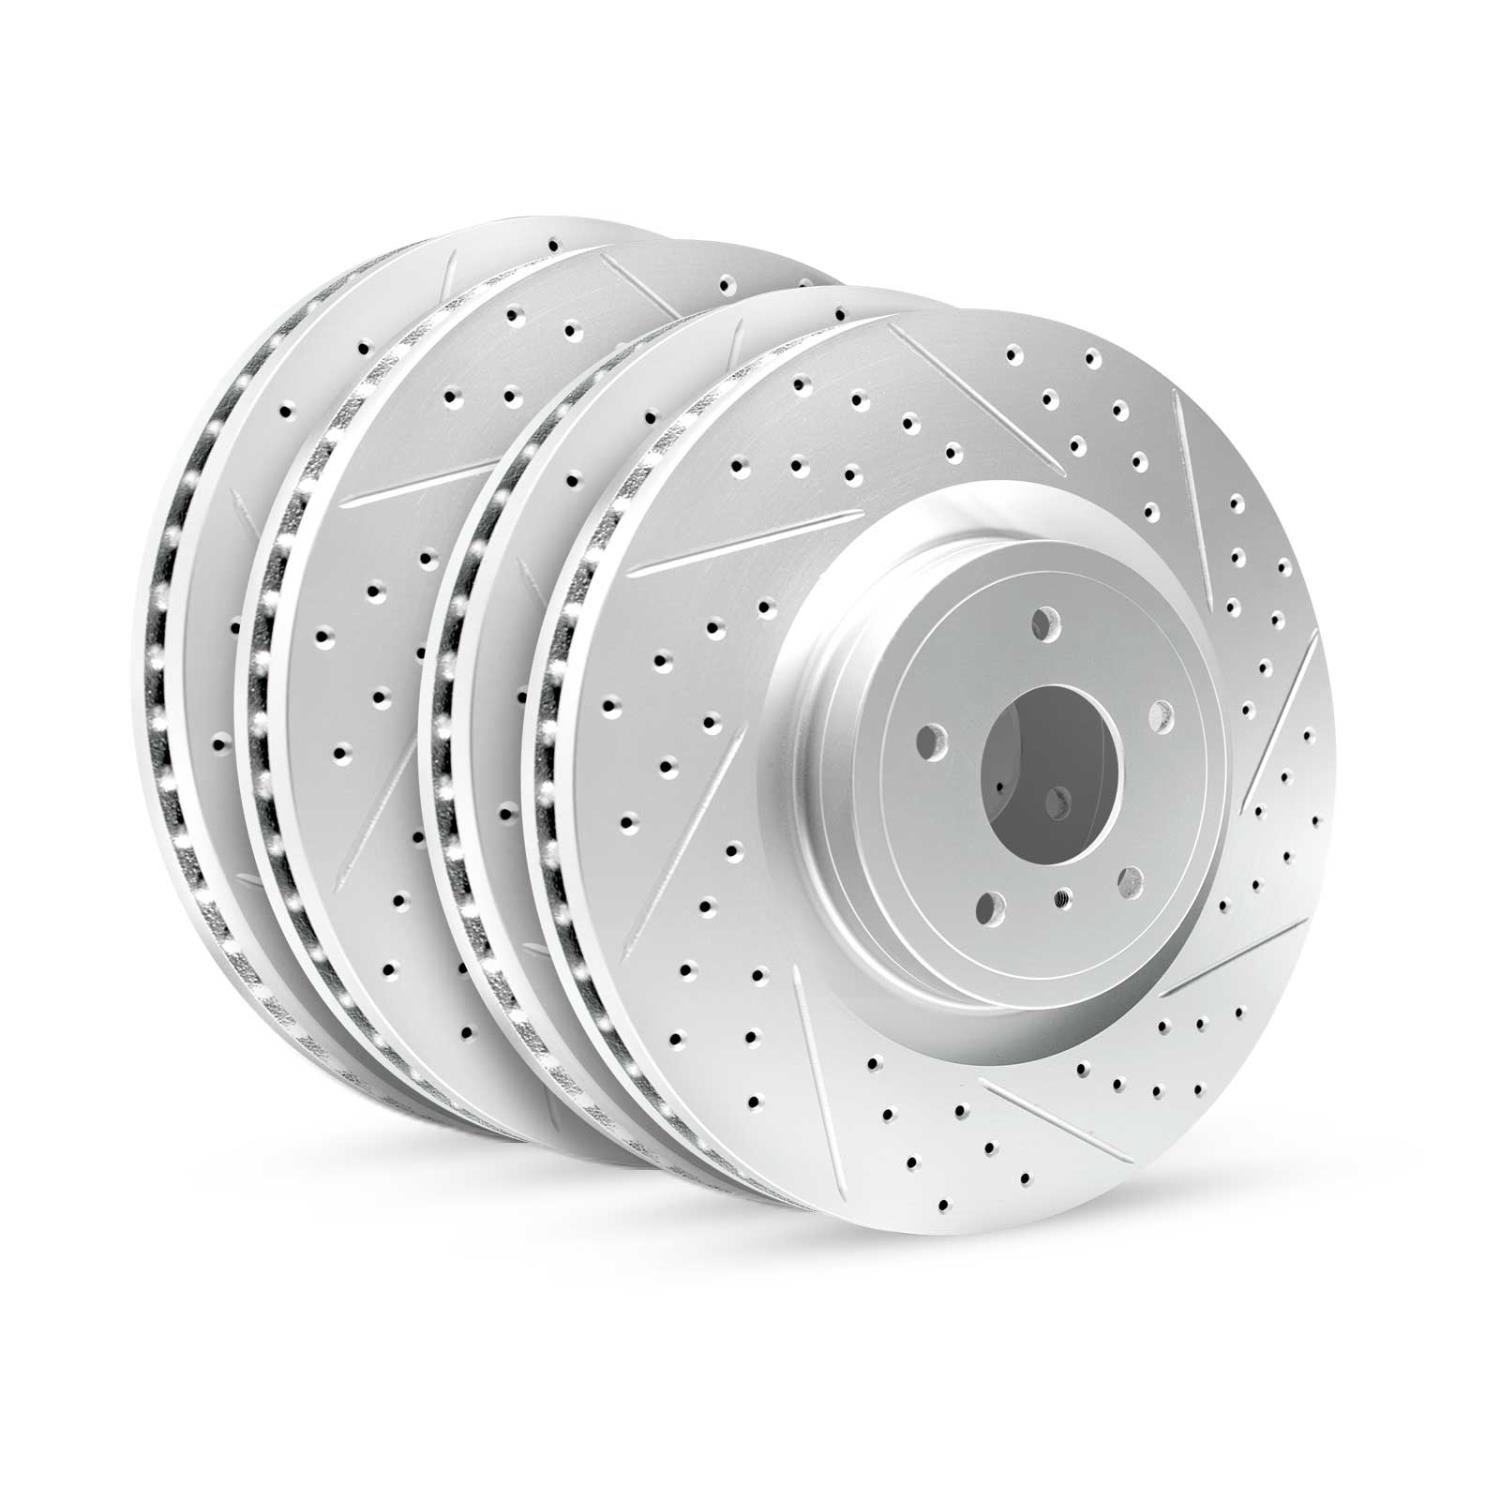 GEO-Carbon Drilled/Slotted Rotors, 2010-2013 Suzuki, Position: